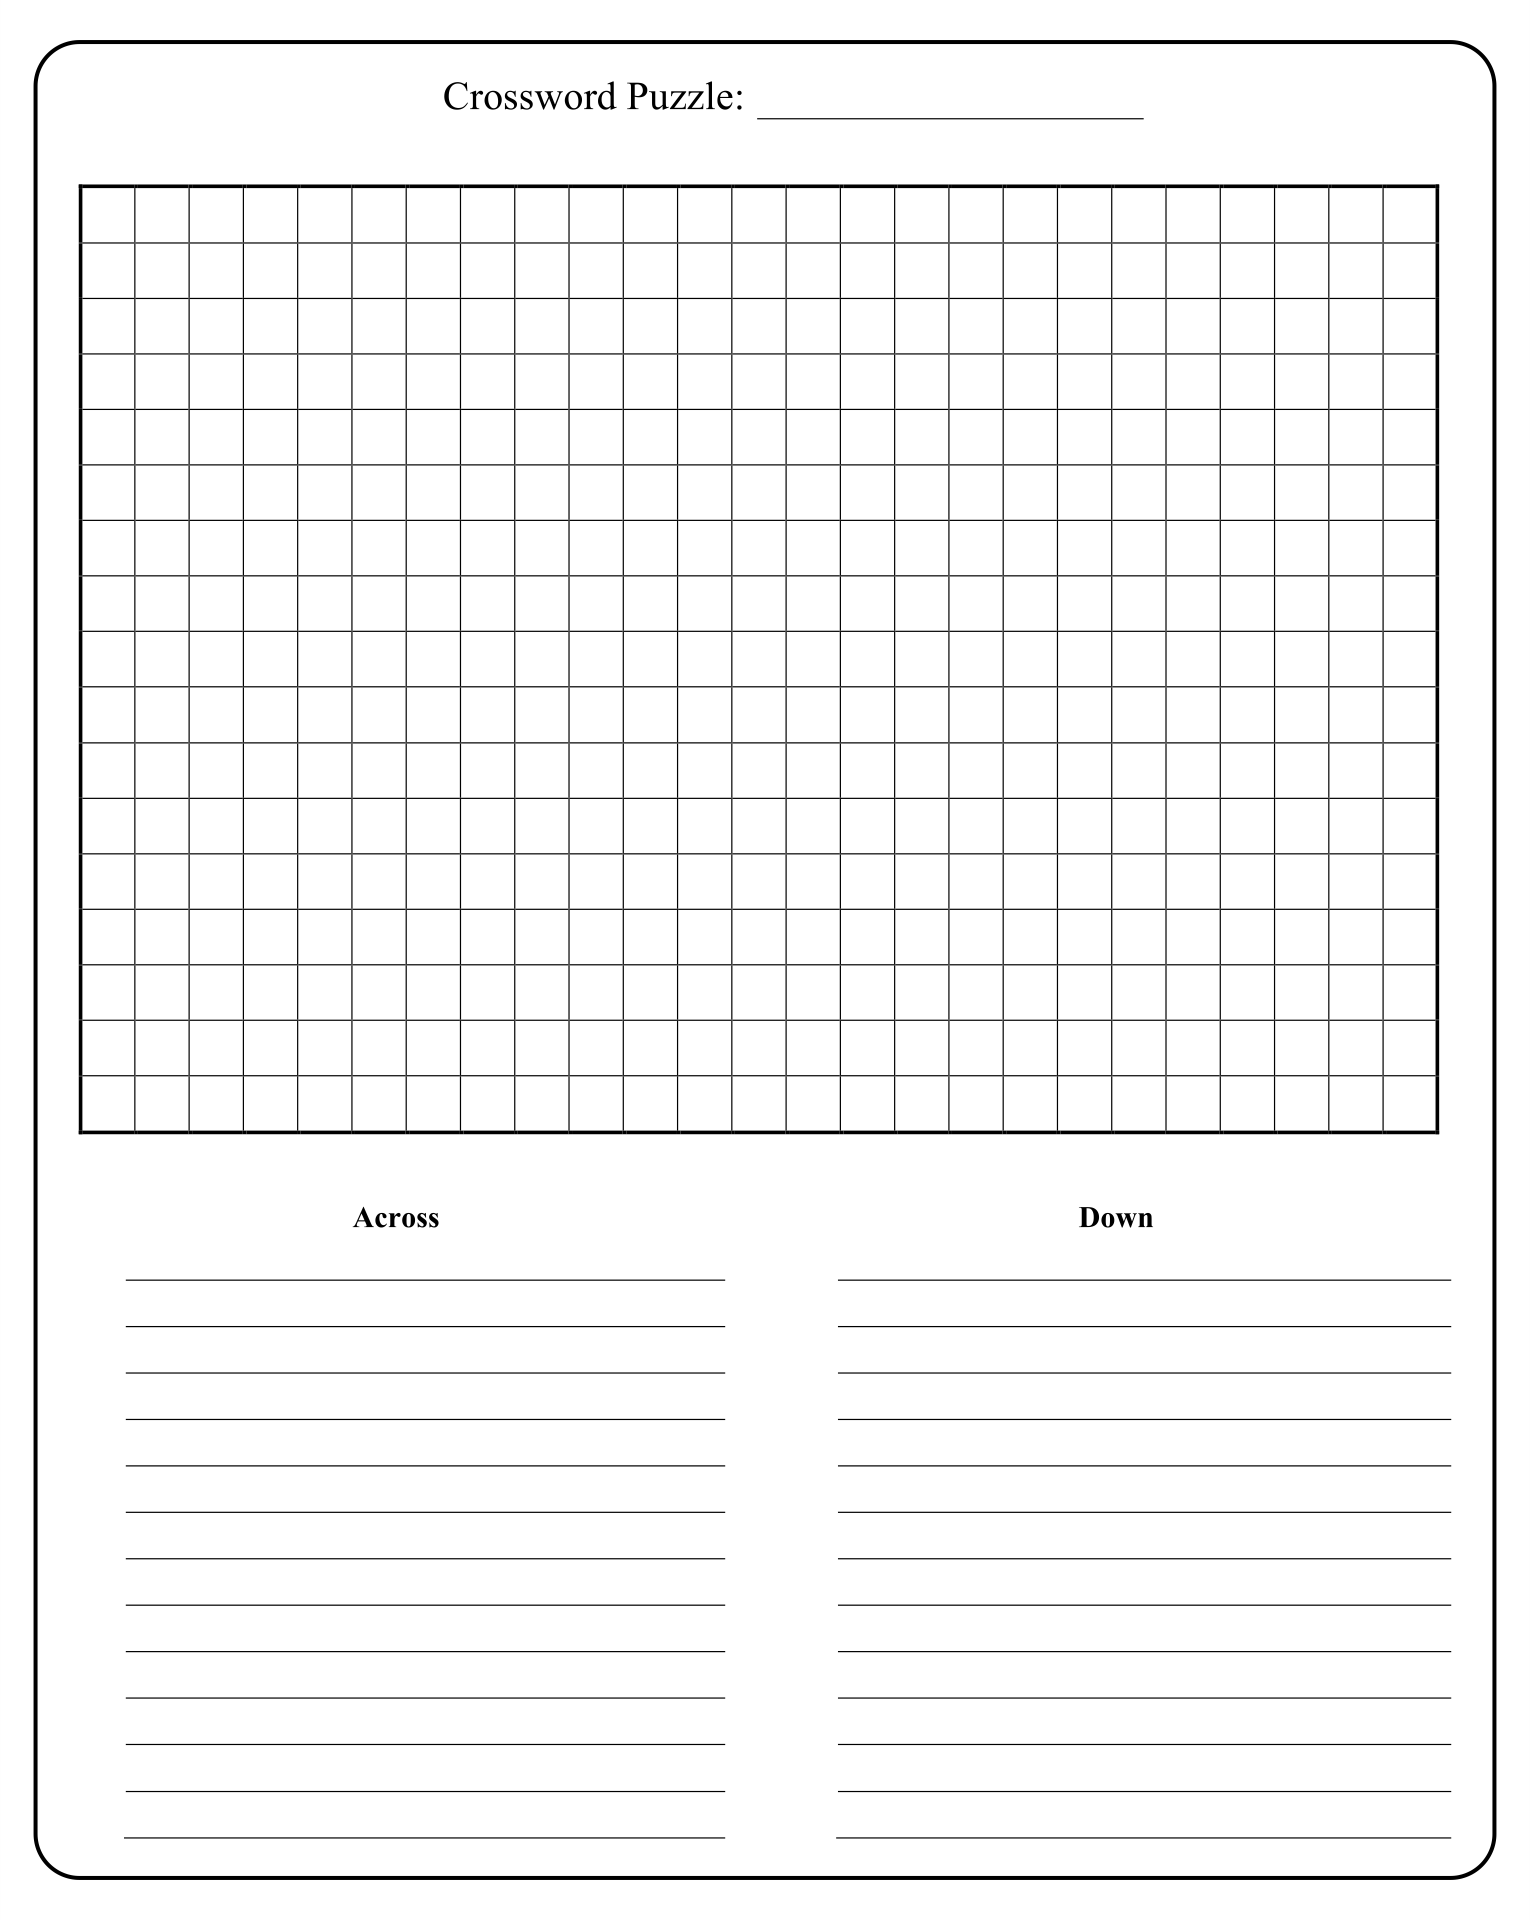 printable-blank-crossword-puzzle-template-printable-templates